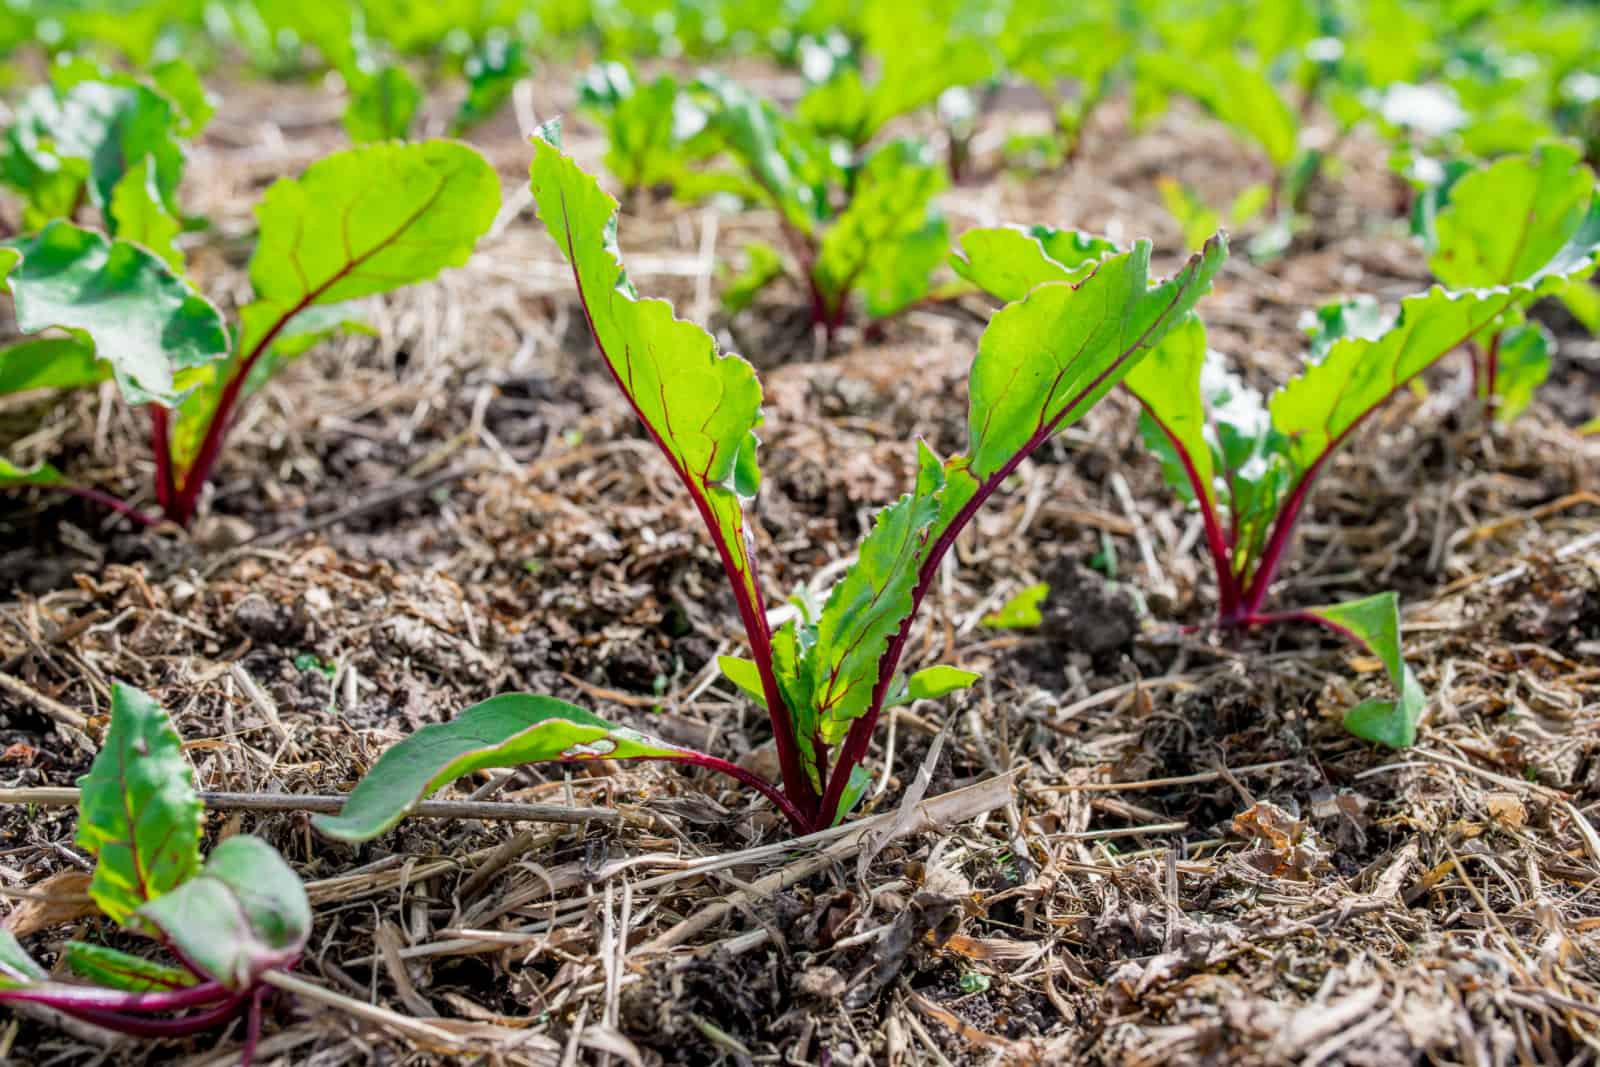 beet leaves resently sprouted from the ground mulched with grass clippings.